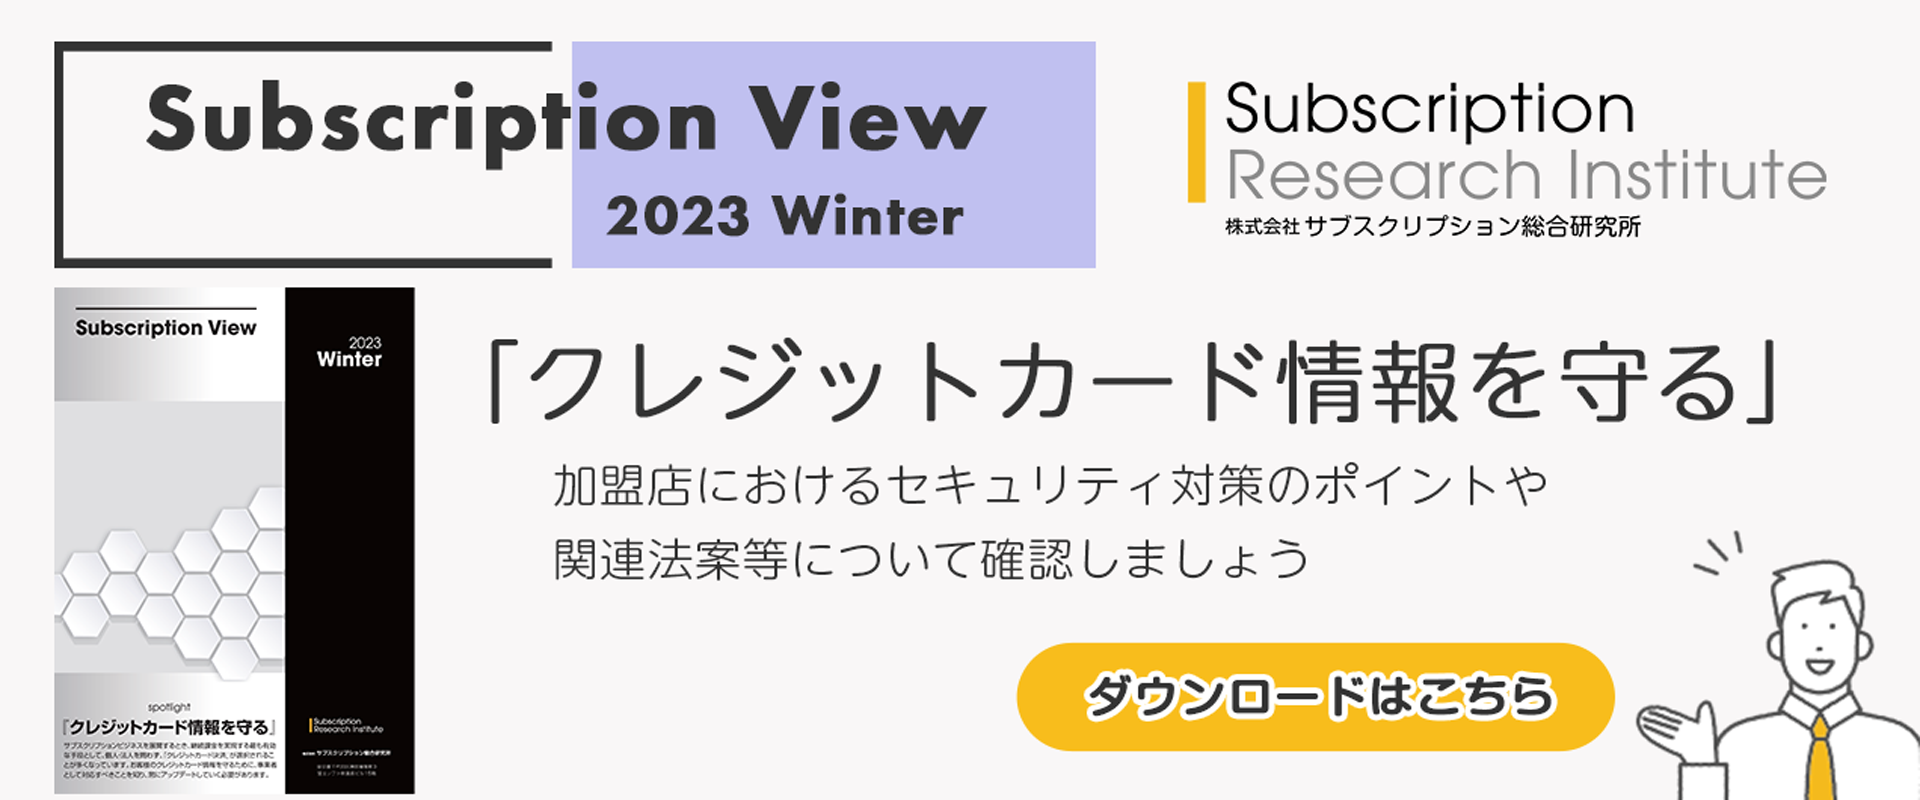 Subscription View 2023 Winter